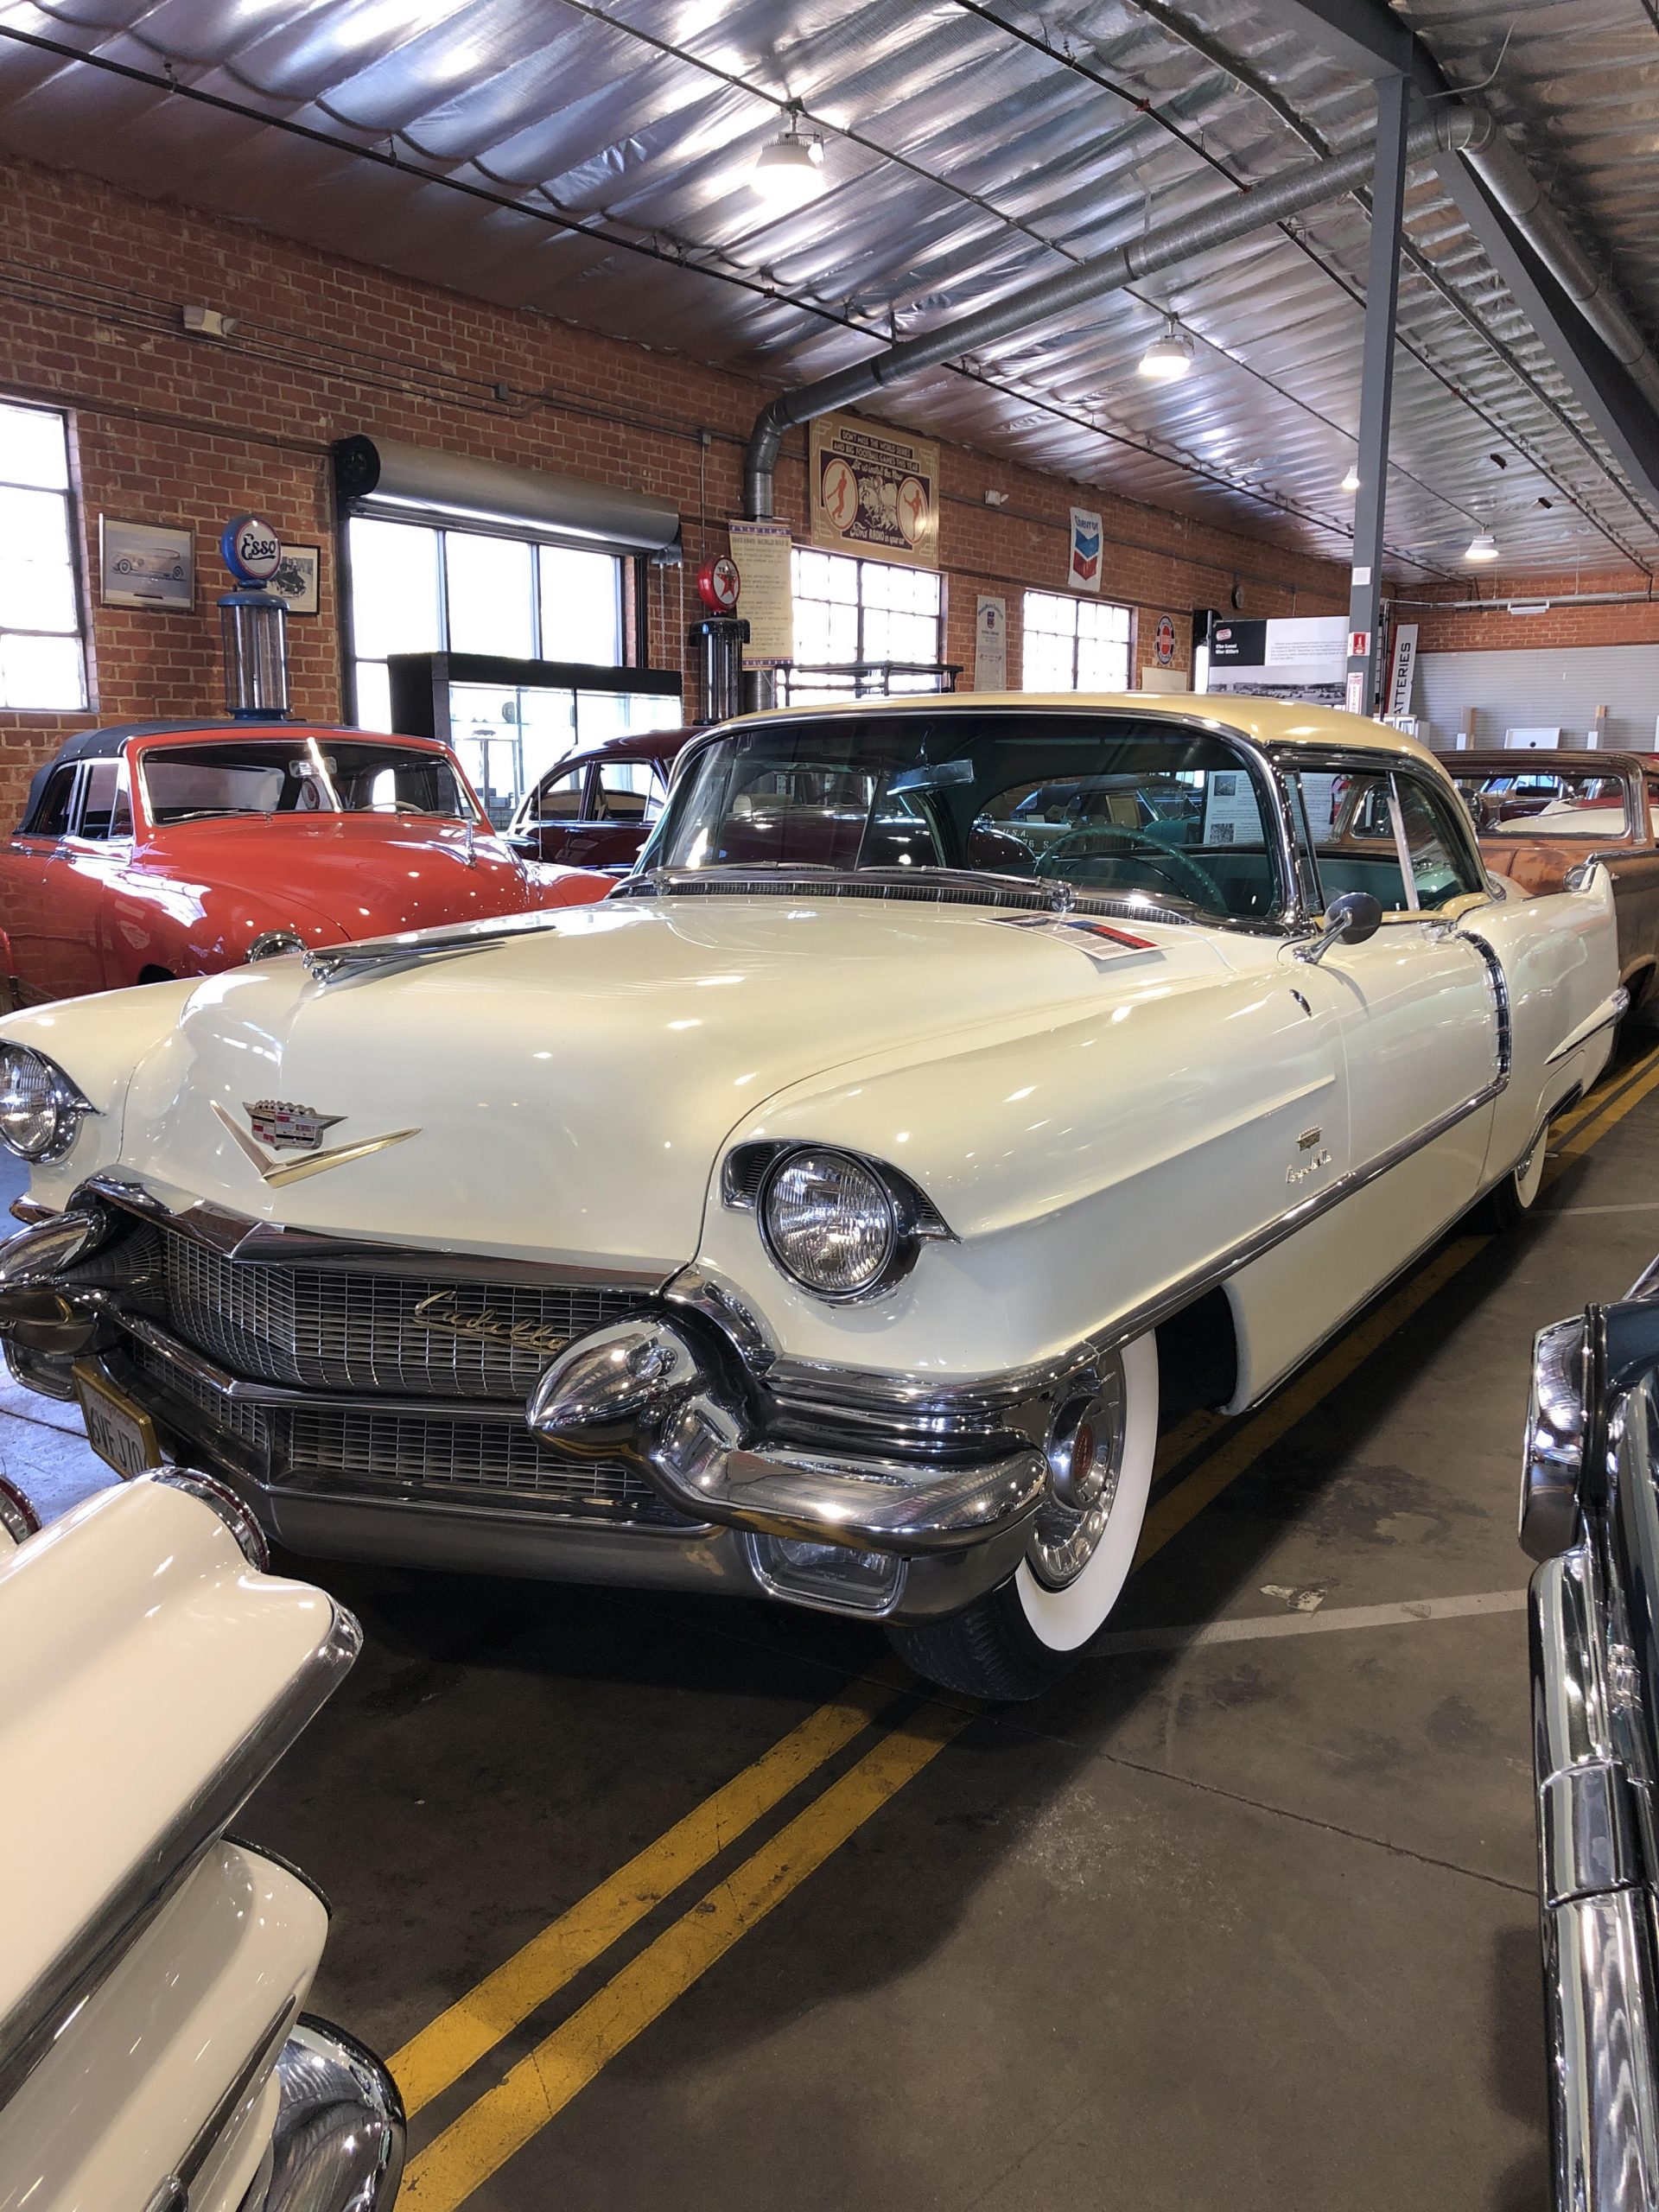 1956 Cadillac Coupe deVille for rent